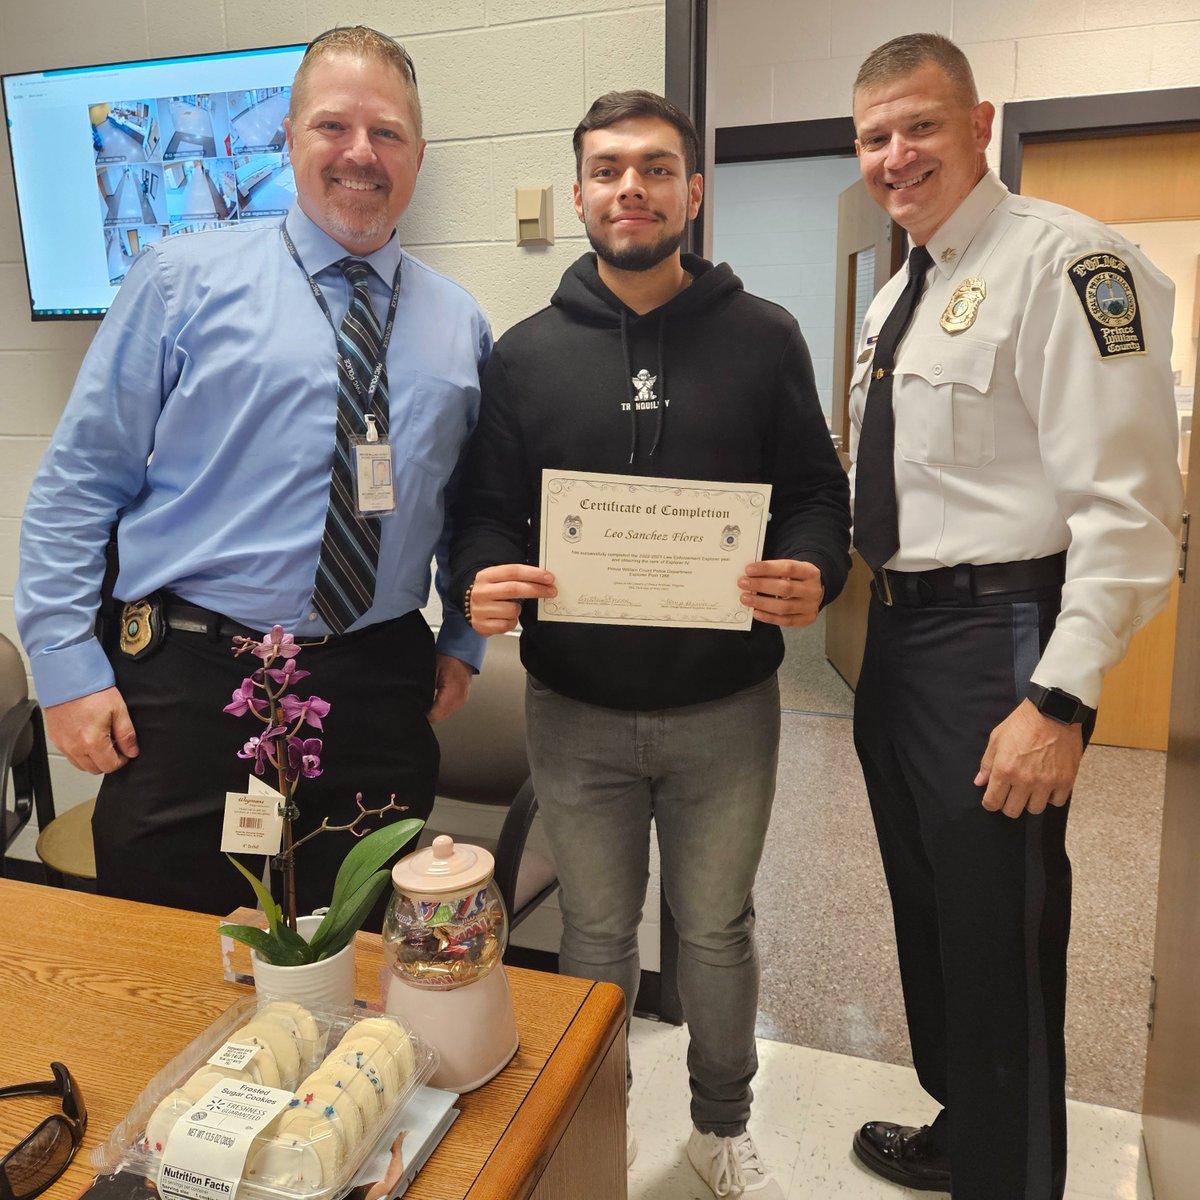 EXPLORER #GRADUATION: LTC Phelps (R) & SGT Grantham (L) recently visited Freedom High School to present senior Leonel Sanchez-Flores (middle) his graduation certificate as a Police #Explorer. Leonel has been a part of the program for 4 years & we wish him all the best! #PWCPD